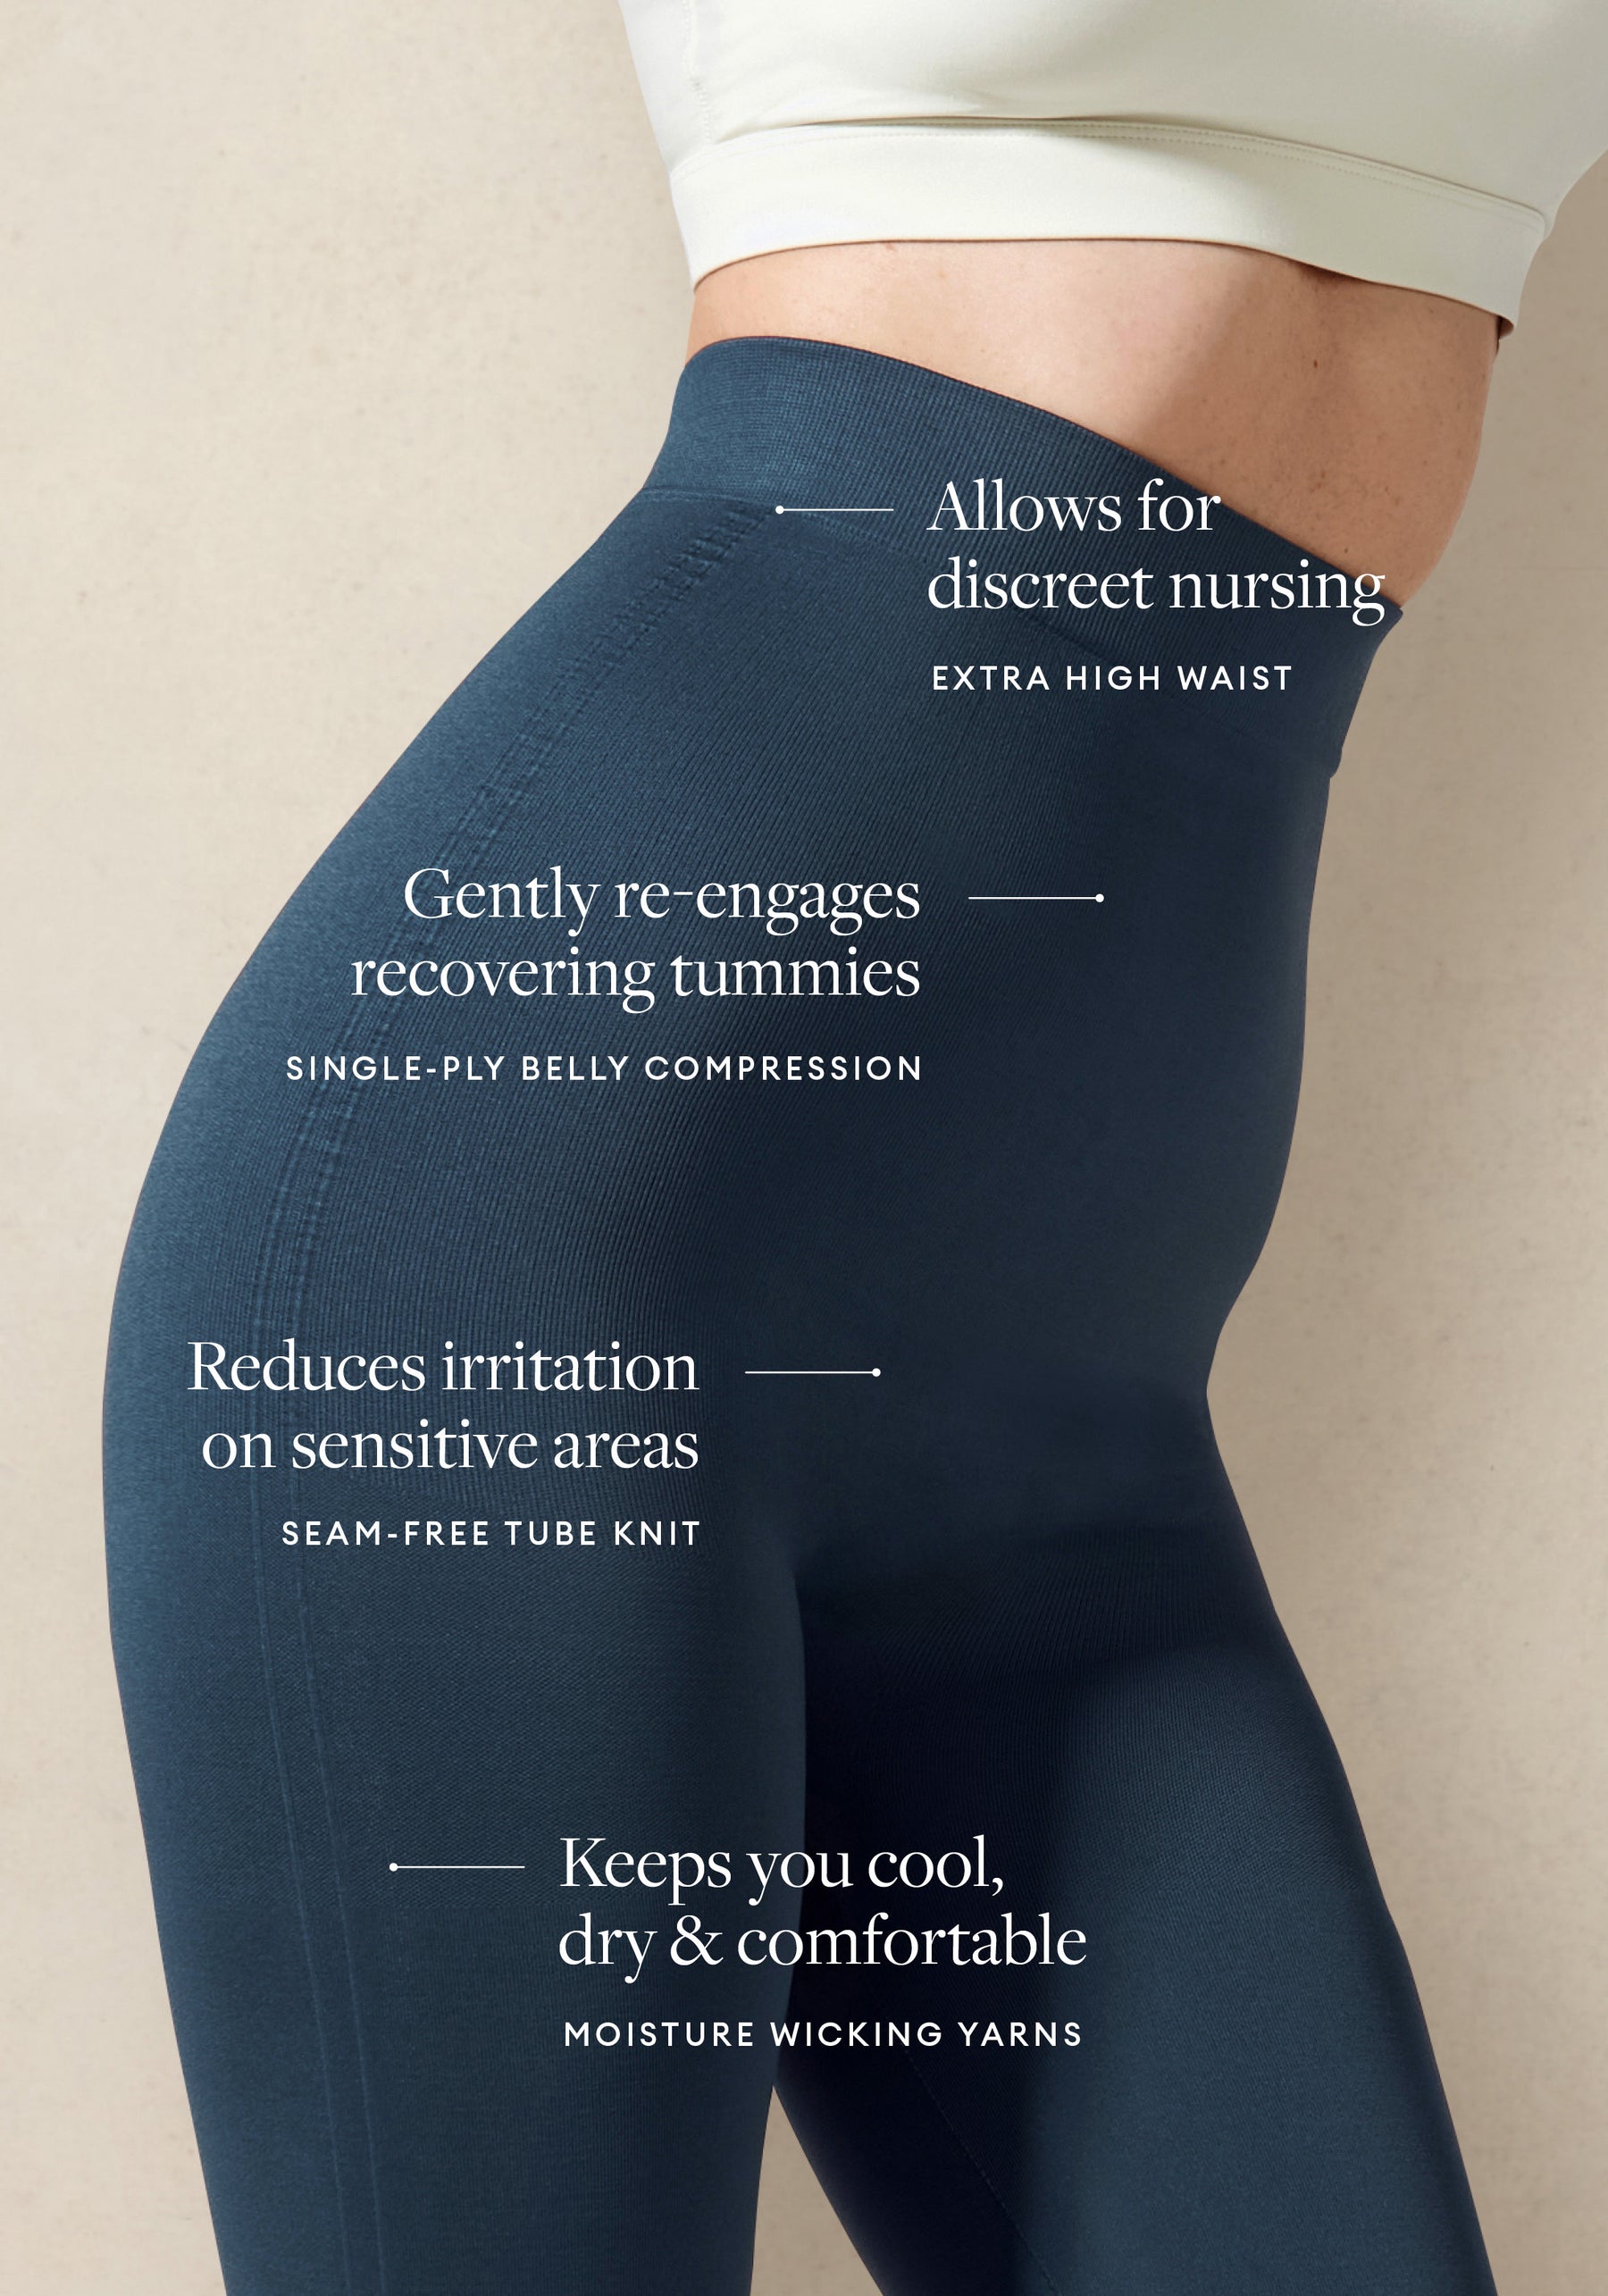 Postpartum Compression - How it Works and How it Helps